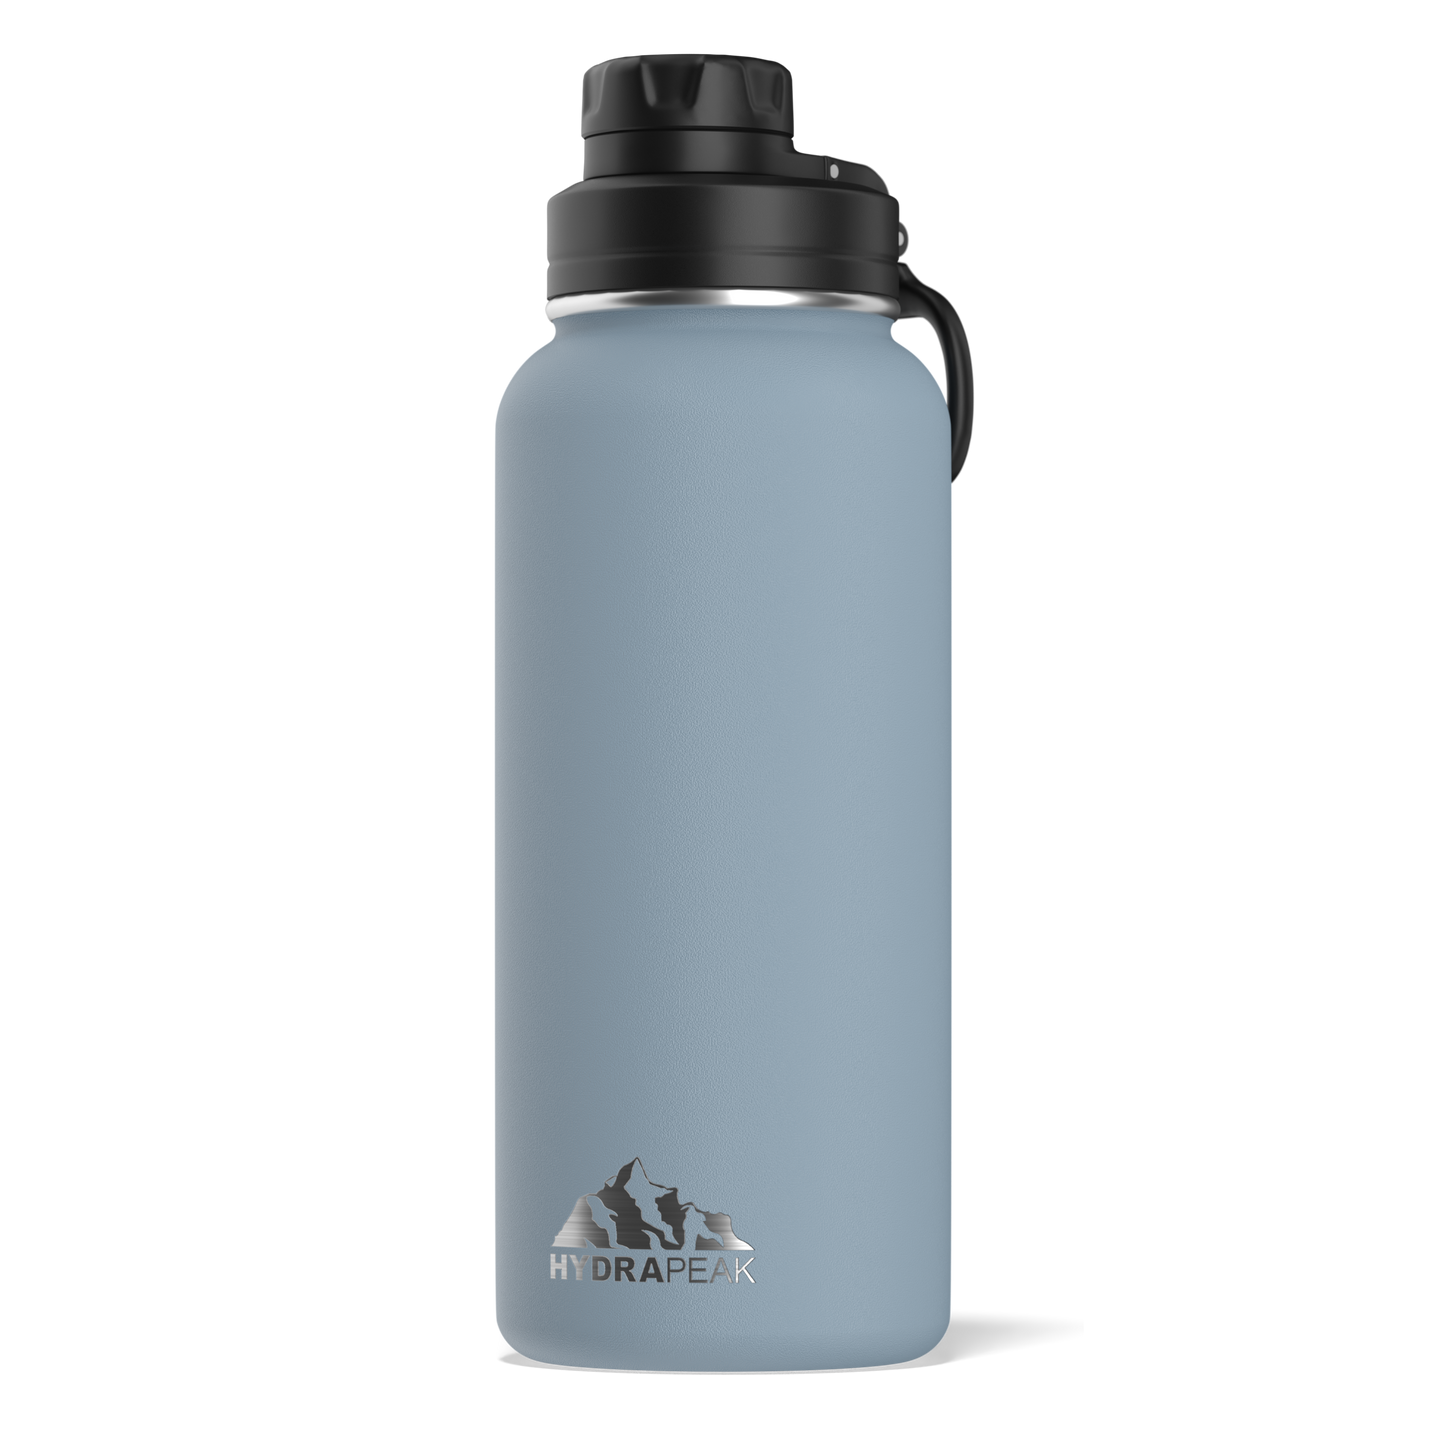 32oz Stainless Steel Insulated Water Bottle with Flexible Chug Lid - Storm